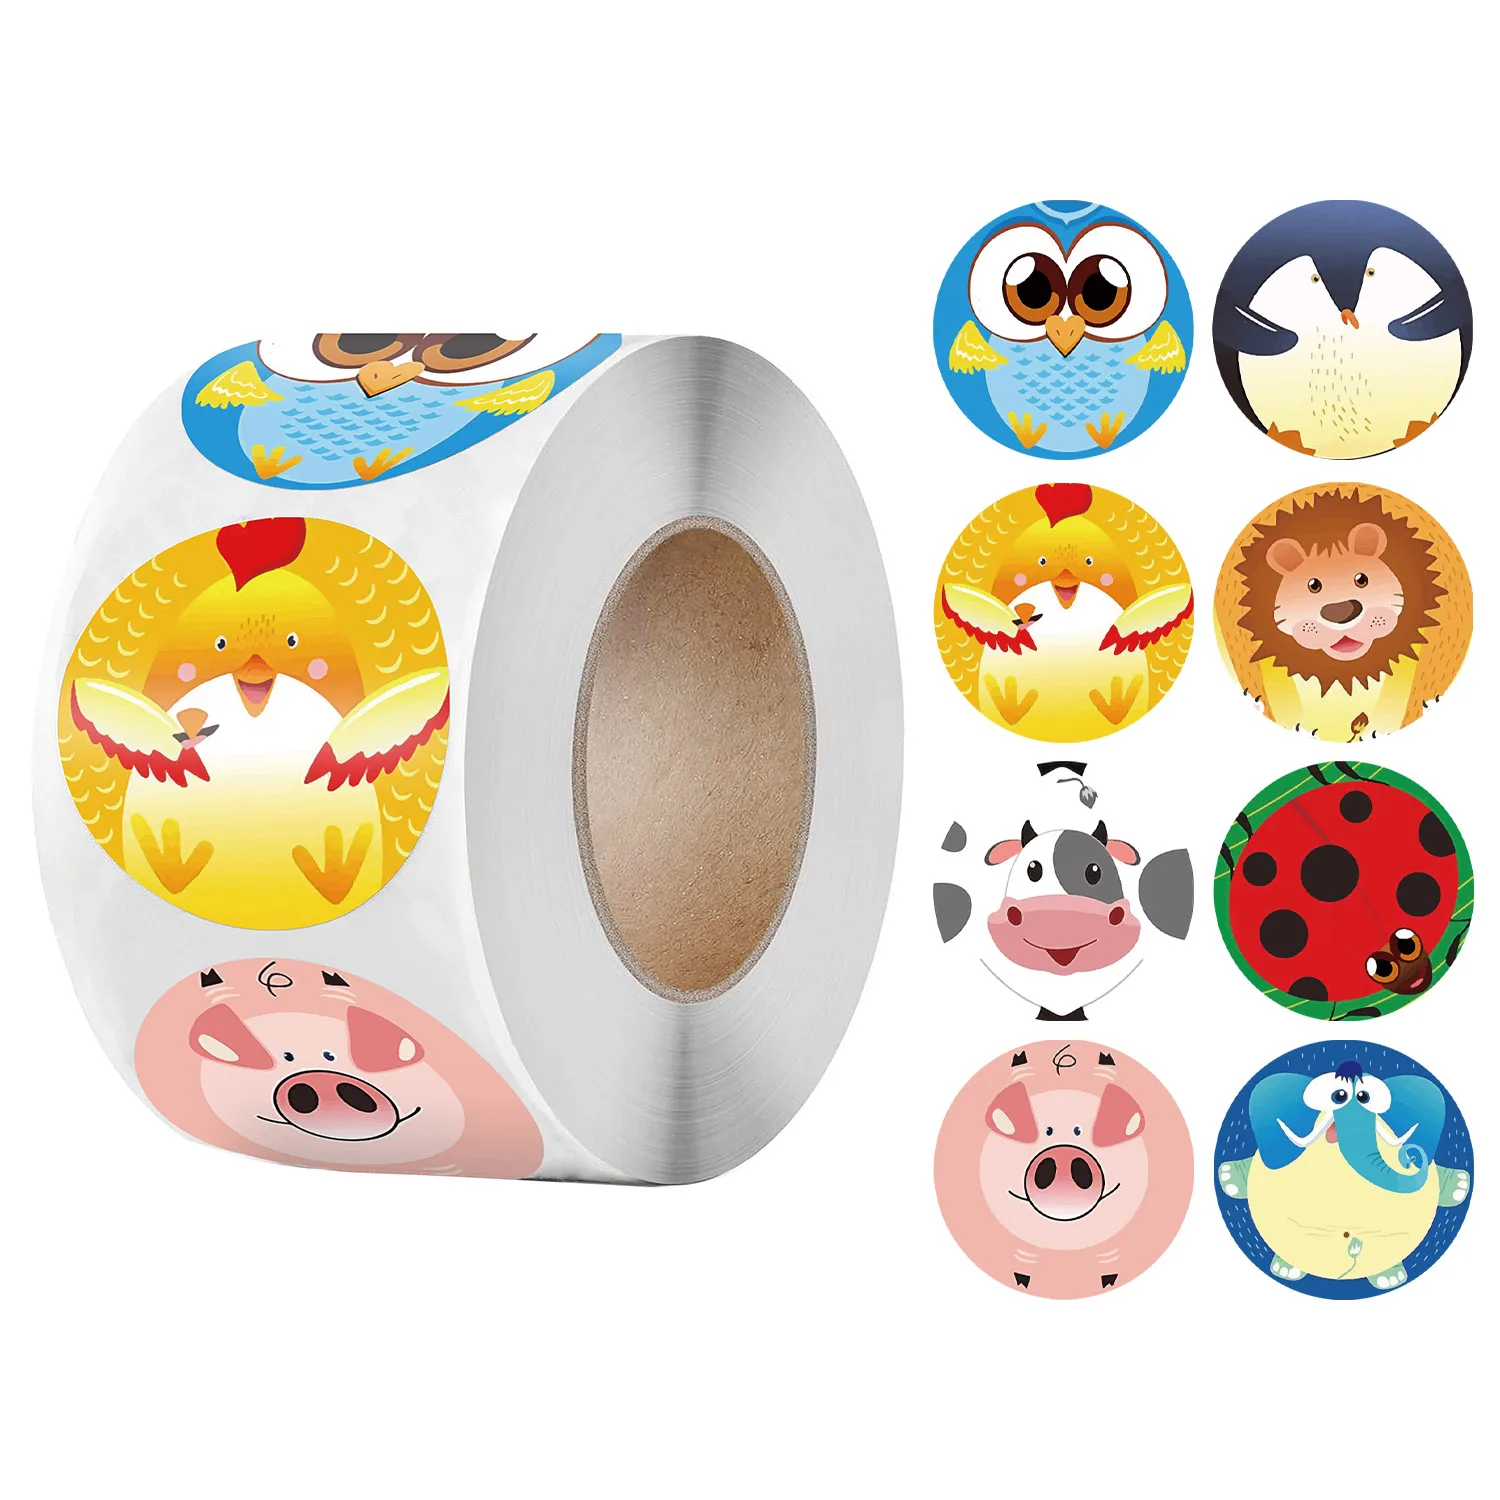 Фото - New Reward Cartoon Sticker for Kids 8 Designs Cute Animals 500pcs/roll for Birthday Party Gift Box Classic Toys Decor Seals Labe 500pcs roll 8 designs happy birthday stickers for party gift package sealing labels kids classic toys stationery scrapbook decor